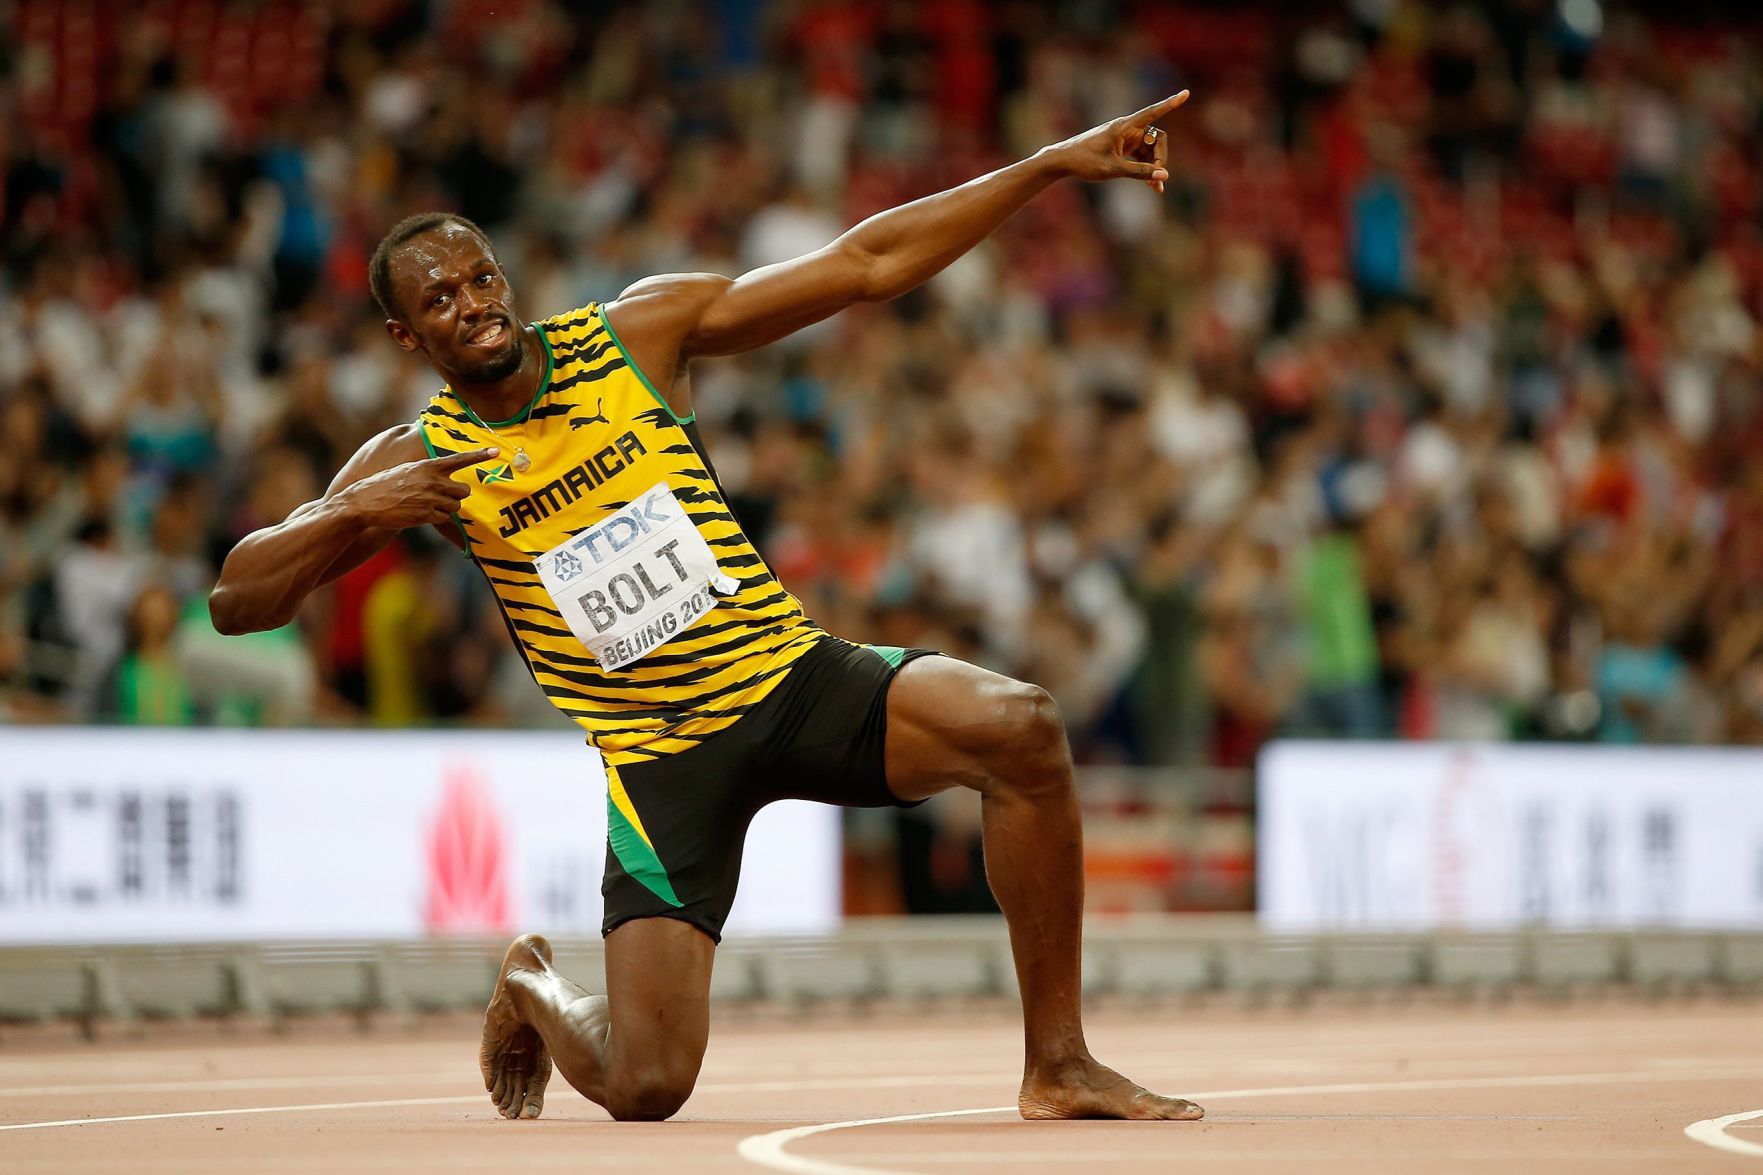 Download Usain Bolt Striking Pose Crowd Watches Wallpaper | Wallpapers.com